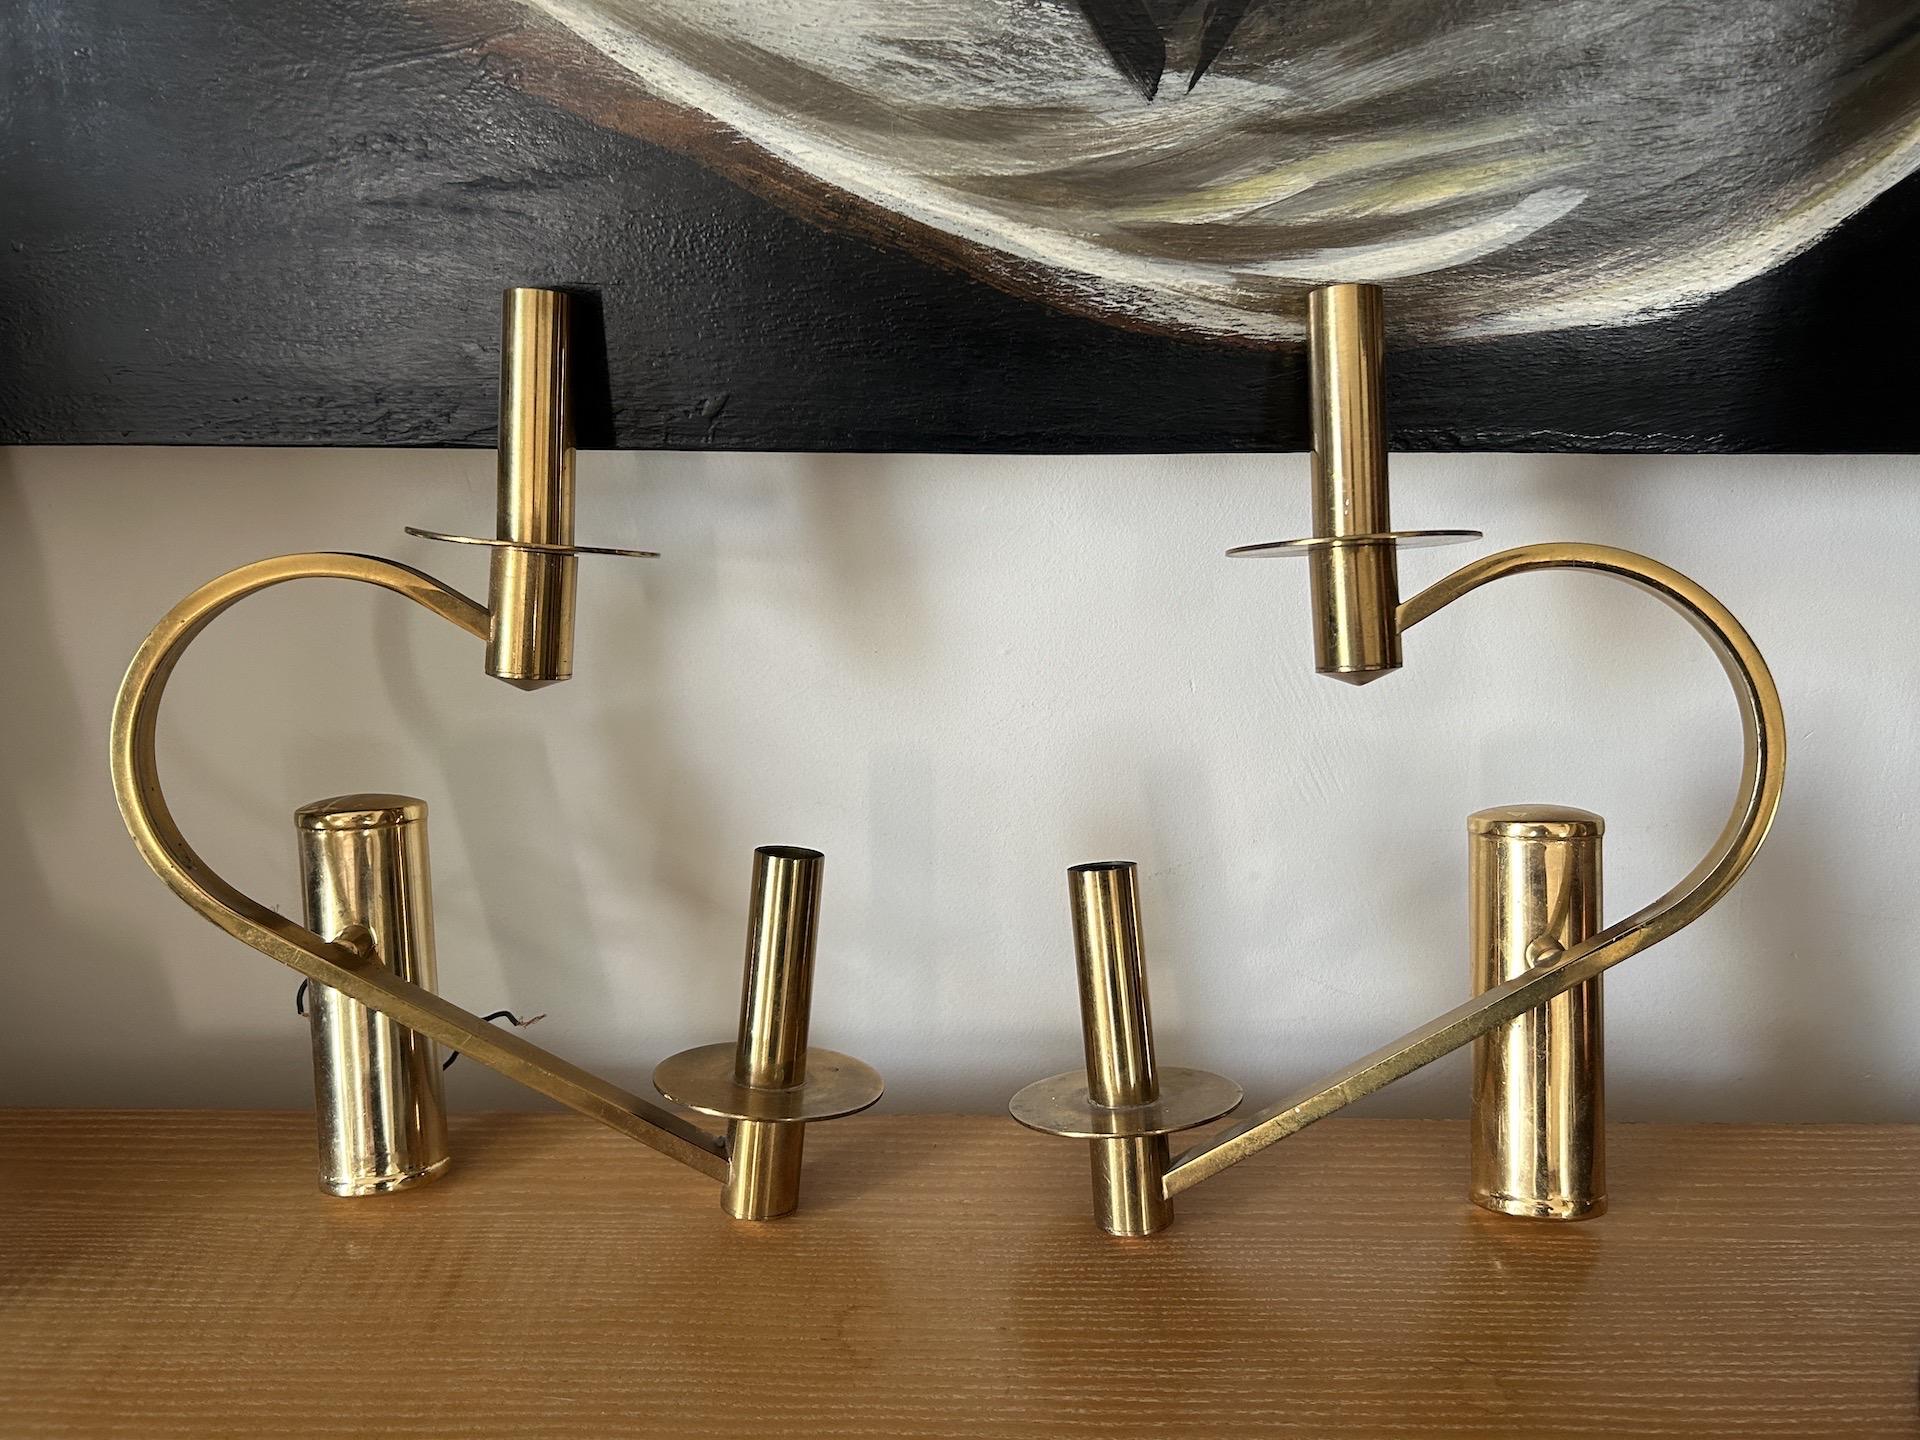 Pair of gilded brass sconces in the style of Gaetano Sciolari 1970 that can form a heart. 2 lights on each sconce. Wiring in good condition. 